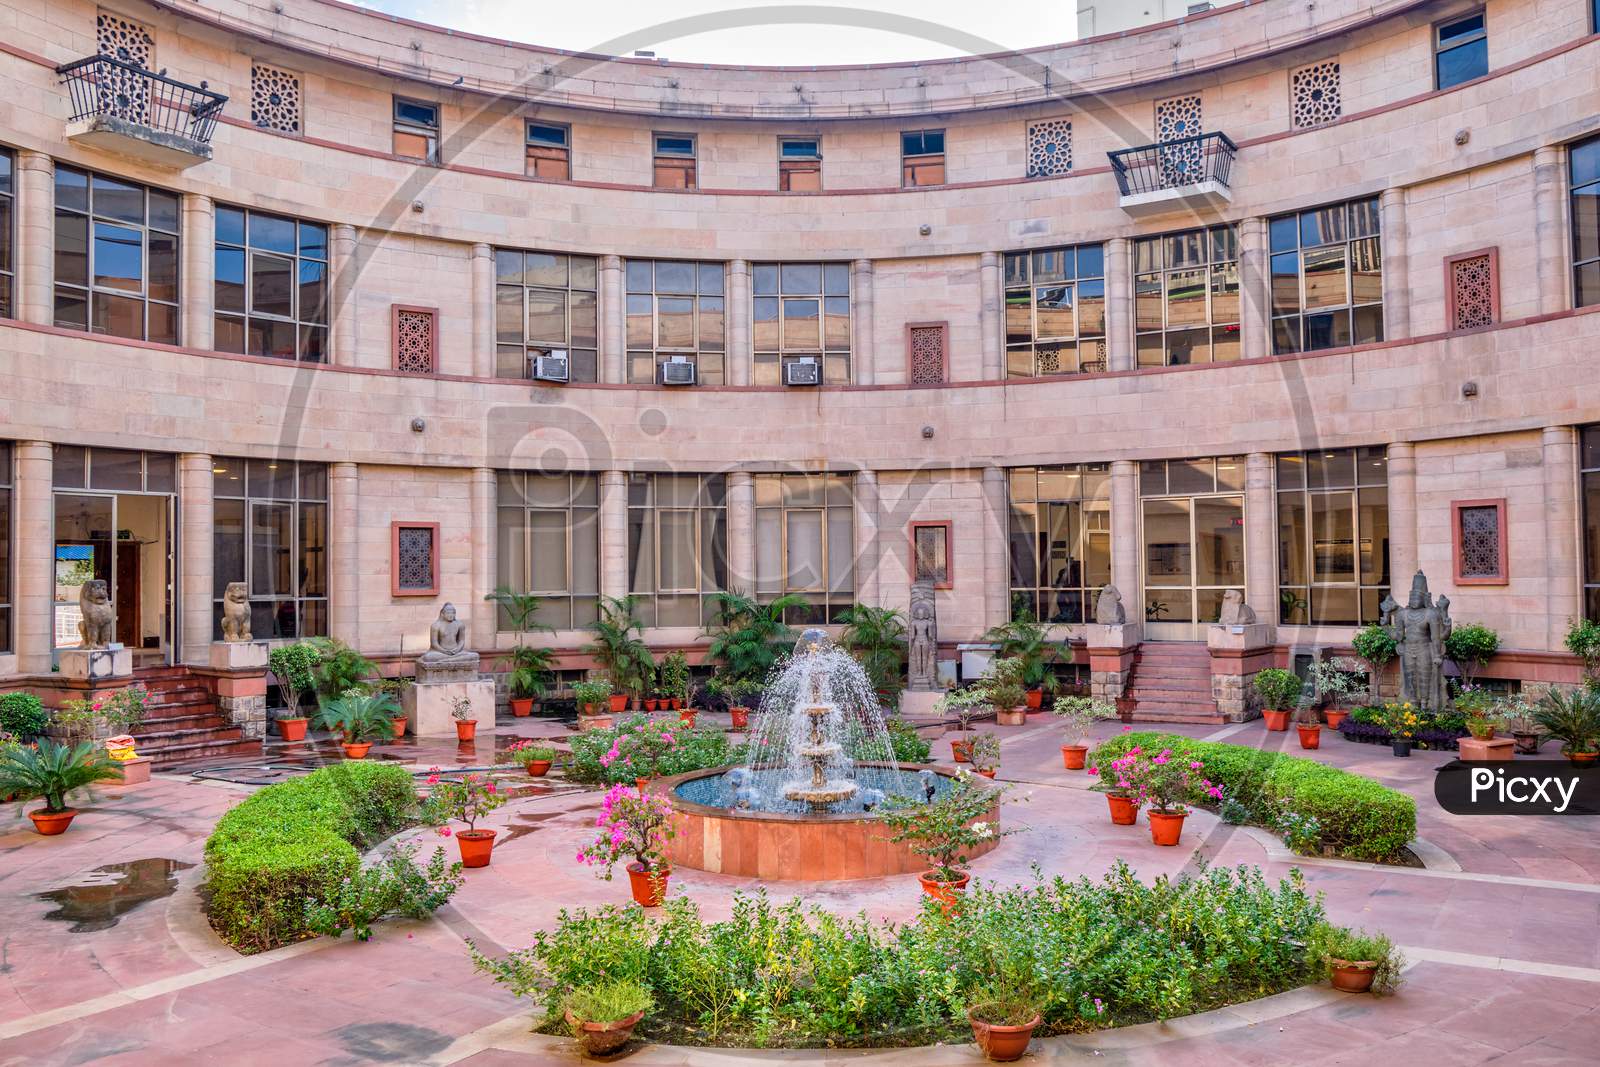 Interior Courtyard Of The National Museum Of India In New Delhi Which Houses Collection Of Artifacts Of 5,000 Years Of Indian Civilization, Culture And History